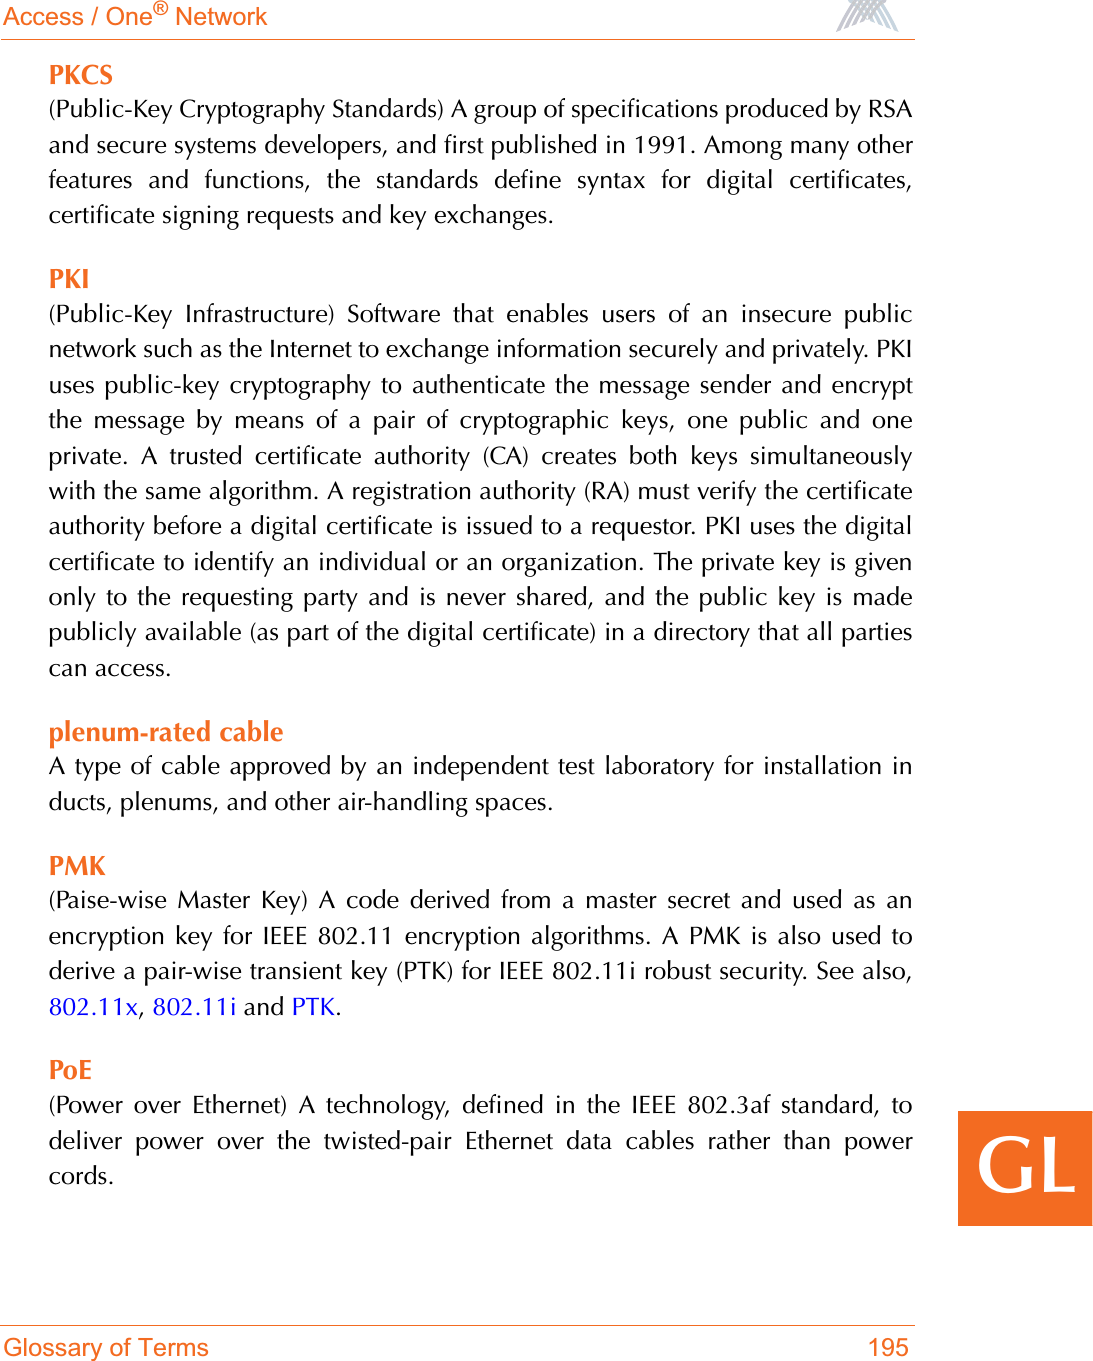 Access / One® NetworkGlossary of Terms 195GLPKCS(Public-Key Cryptography Standards) A group of specifications produced by RSAand secure systems developers, and first published in 1991. Among many otherfeatures and functions, the standards define syntax for digital certificates,certificate signing requests and key exchanges.PKI(Public-Key Infrastructure) Software that enables users of an insecure publicnetwork such as the Internet to exchange information securely and privately. PKIuses public-key cryptography to authenticate the message sender and encryptthe message by means of a pair of cryptographic keys, one public and oneprivate. A trusted certificate authority (CA) creates both keys simultaneouslywith the same algorithm. A registration authority (RA) must verify the certificateauthority before a digital certificate is issued to a requestor. PKI uses the digitalcertificate to identify an individual or an organization. The private key is givenonly to the requesting party and is never shared, and the public key is madepublicly available (as part of the digital certificate) in a directory that all partiescan access.plenum-rated cableA type of cable approved by an independent test laboratory for installation inducts, plenums, and other air-handling spaces.PMK(Paise-wise Master Key) A code derived from a master secret and used as anencryption key for IEEE 802.11 encryption algorithms. A PMK is also used toderive a pair-wise transient key (PTK) for IEEE 802.11i robust security. See also,802.11x,802.11i and PTK.PoE(Power over Ethernet) A technology, defined in the IEEE 802.3af standard, todeliver power over the twisted-pair Ethernet data cables rather than powercords.